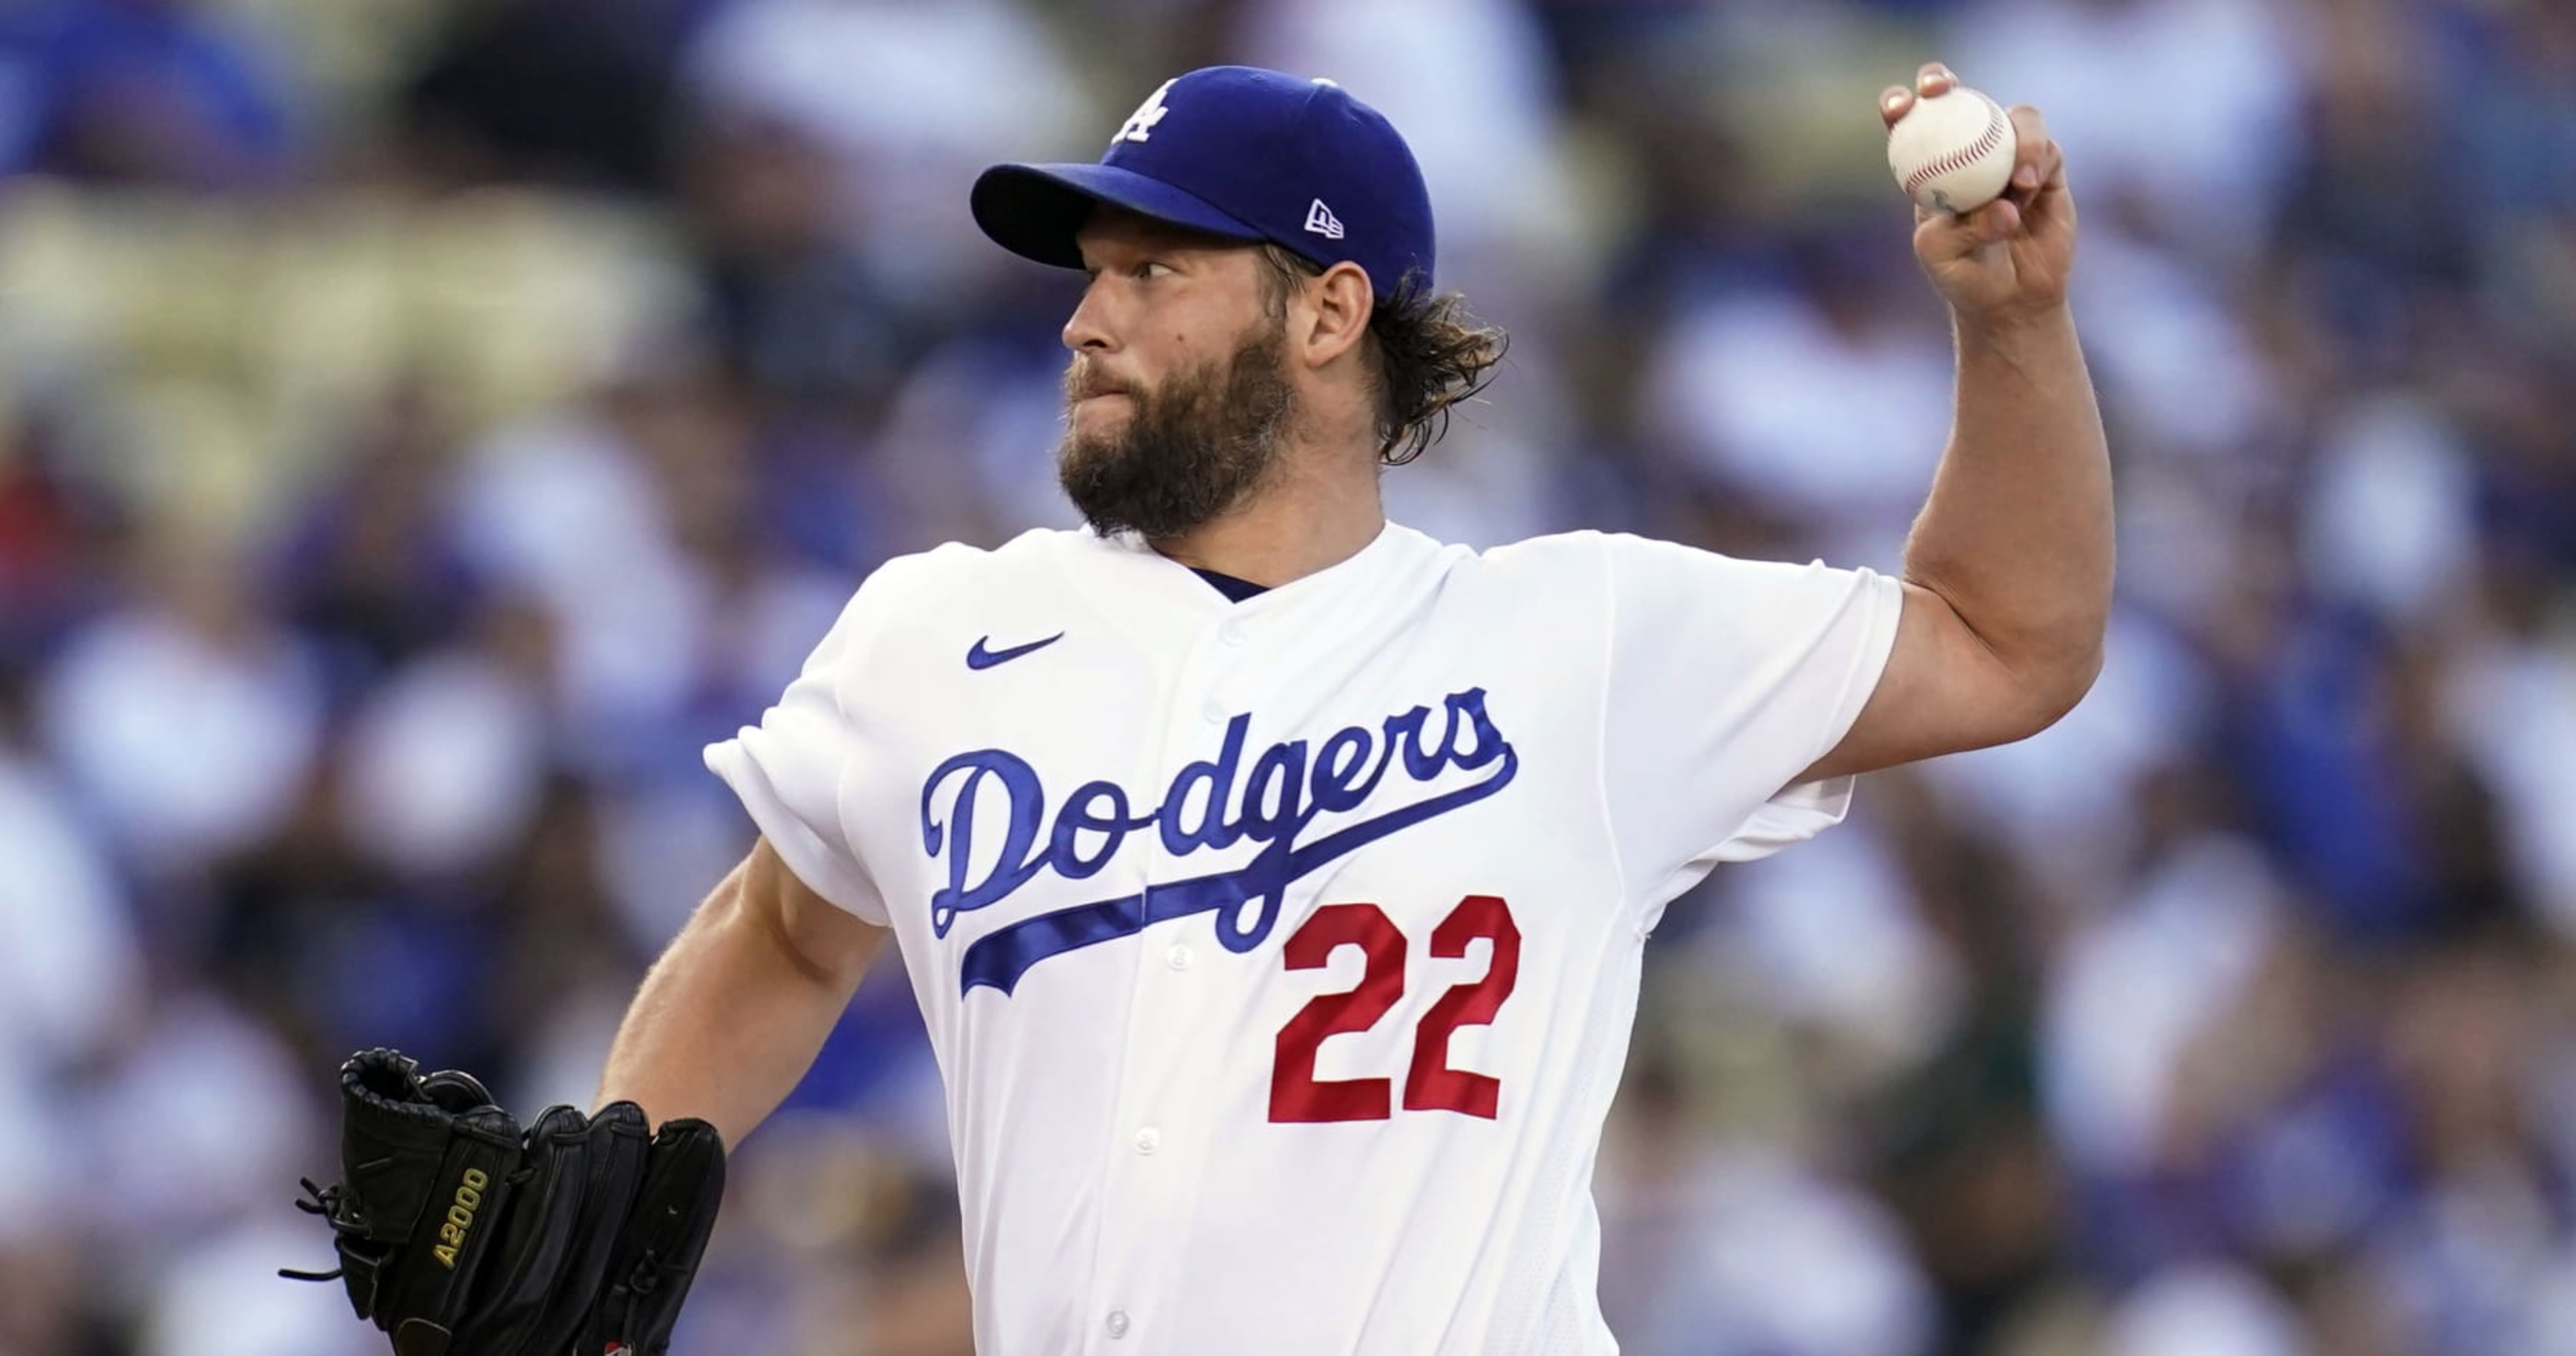 Dodgers' Clayton Kershaw to Play for Team USA in 2023 World